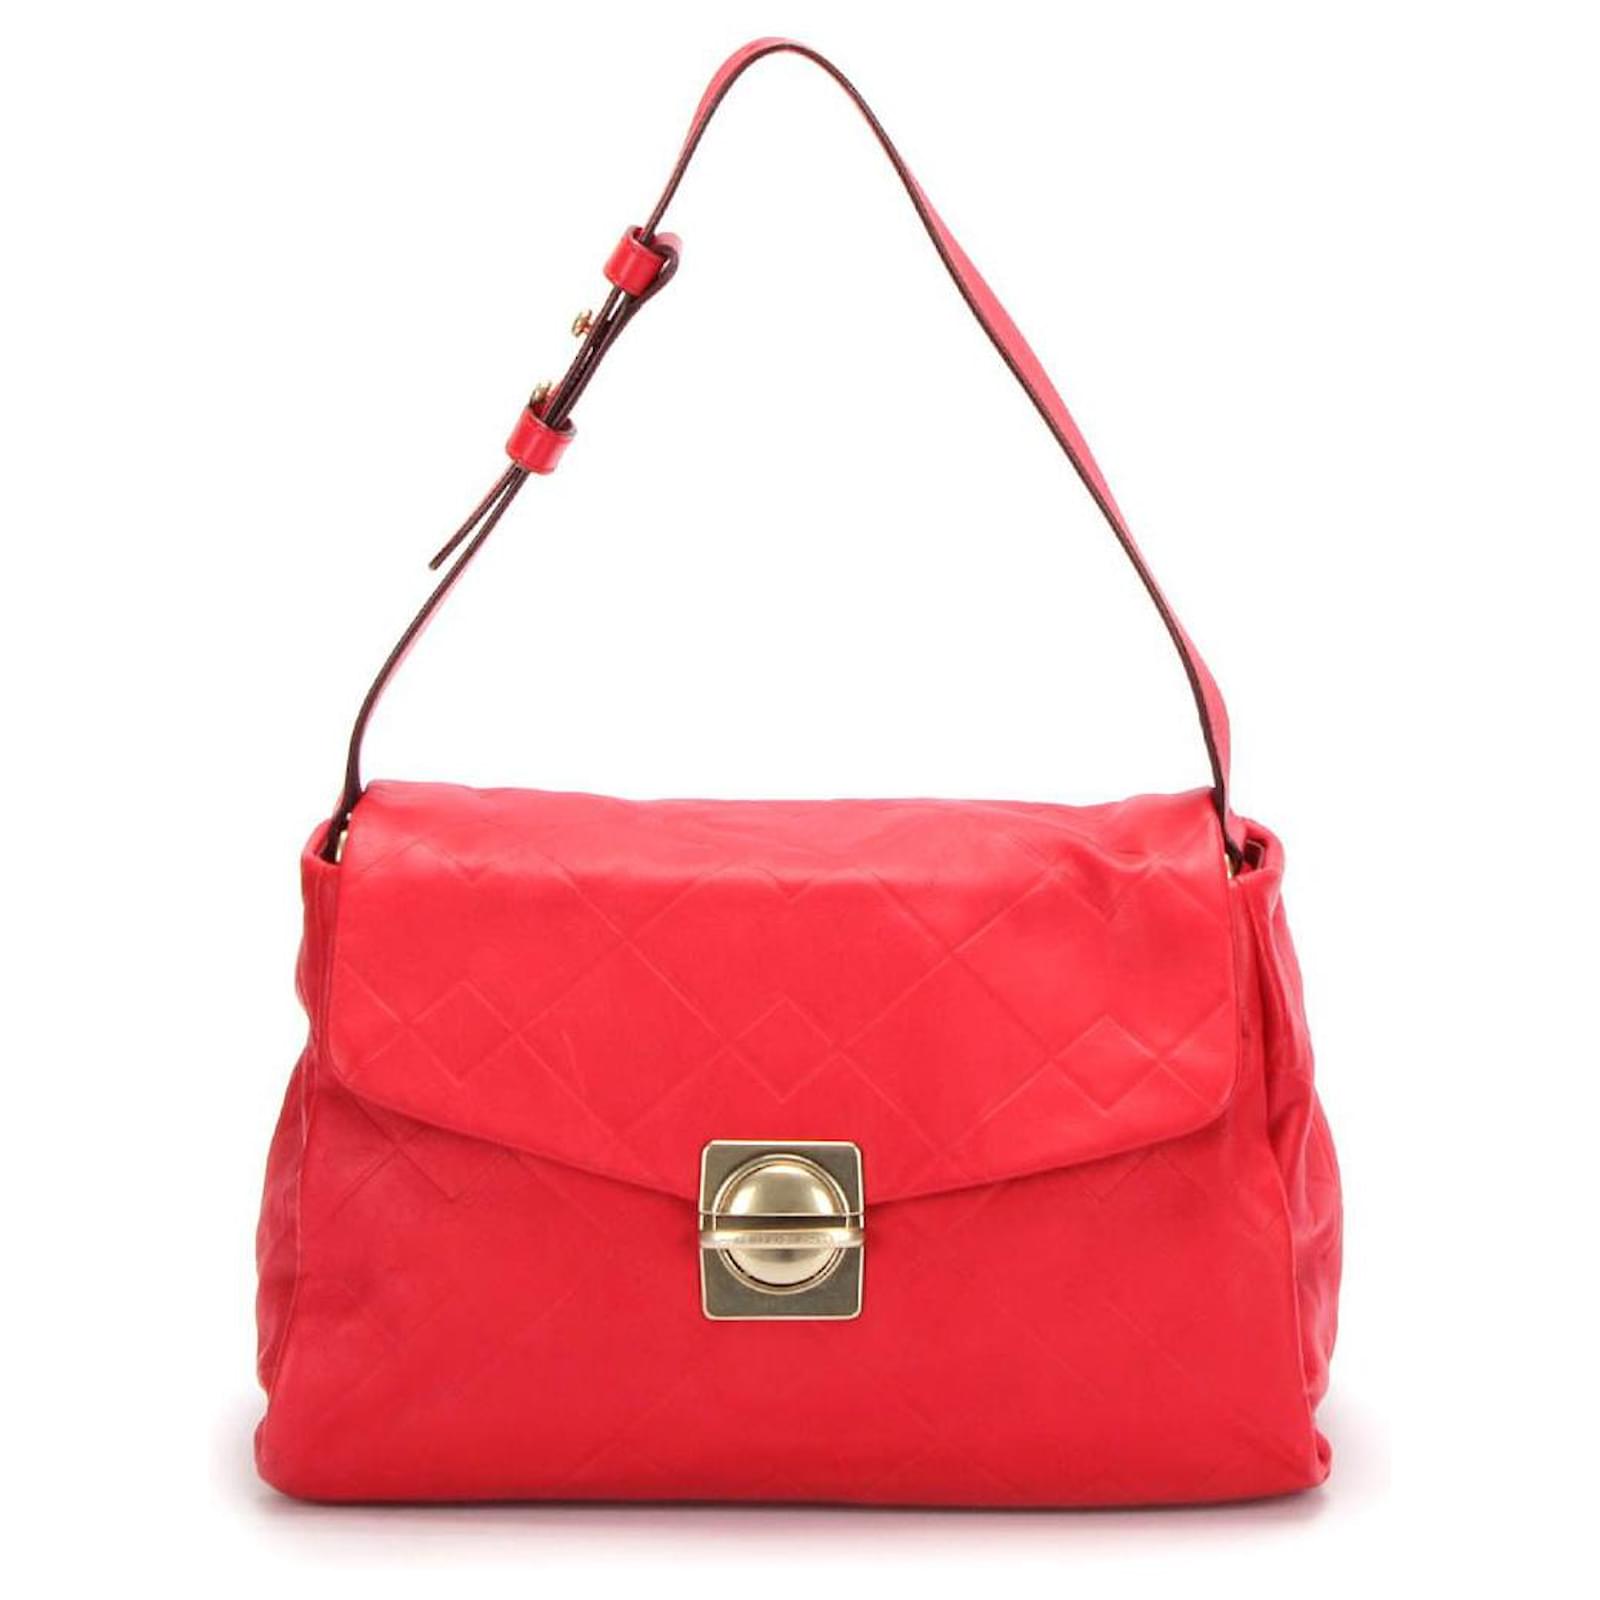 Marc Jacobs Circle in Square Leather Shoulder Bag in red calf leather ...